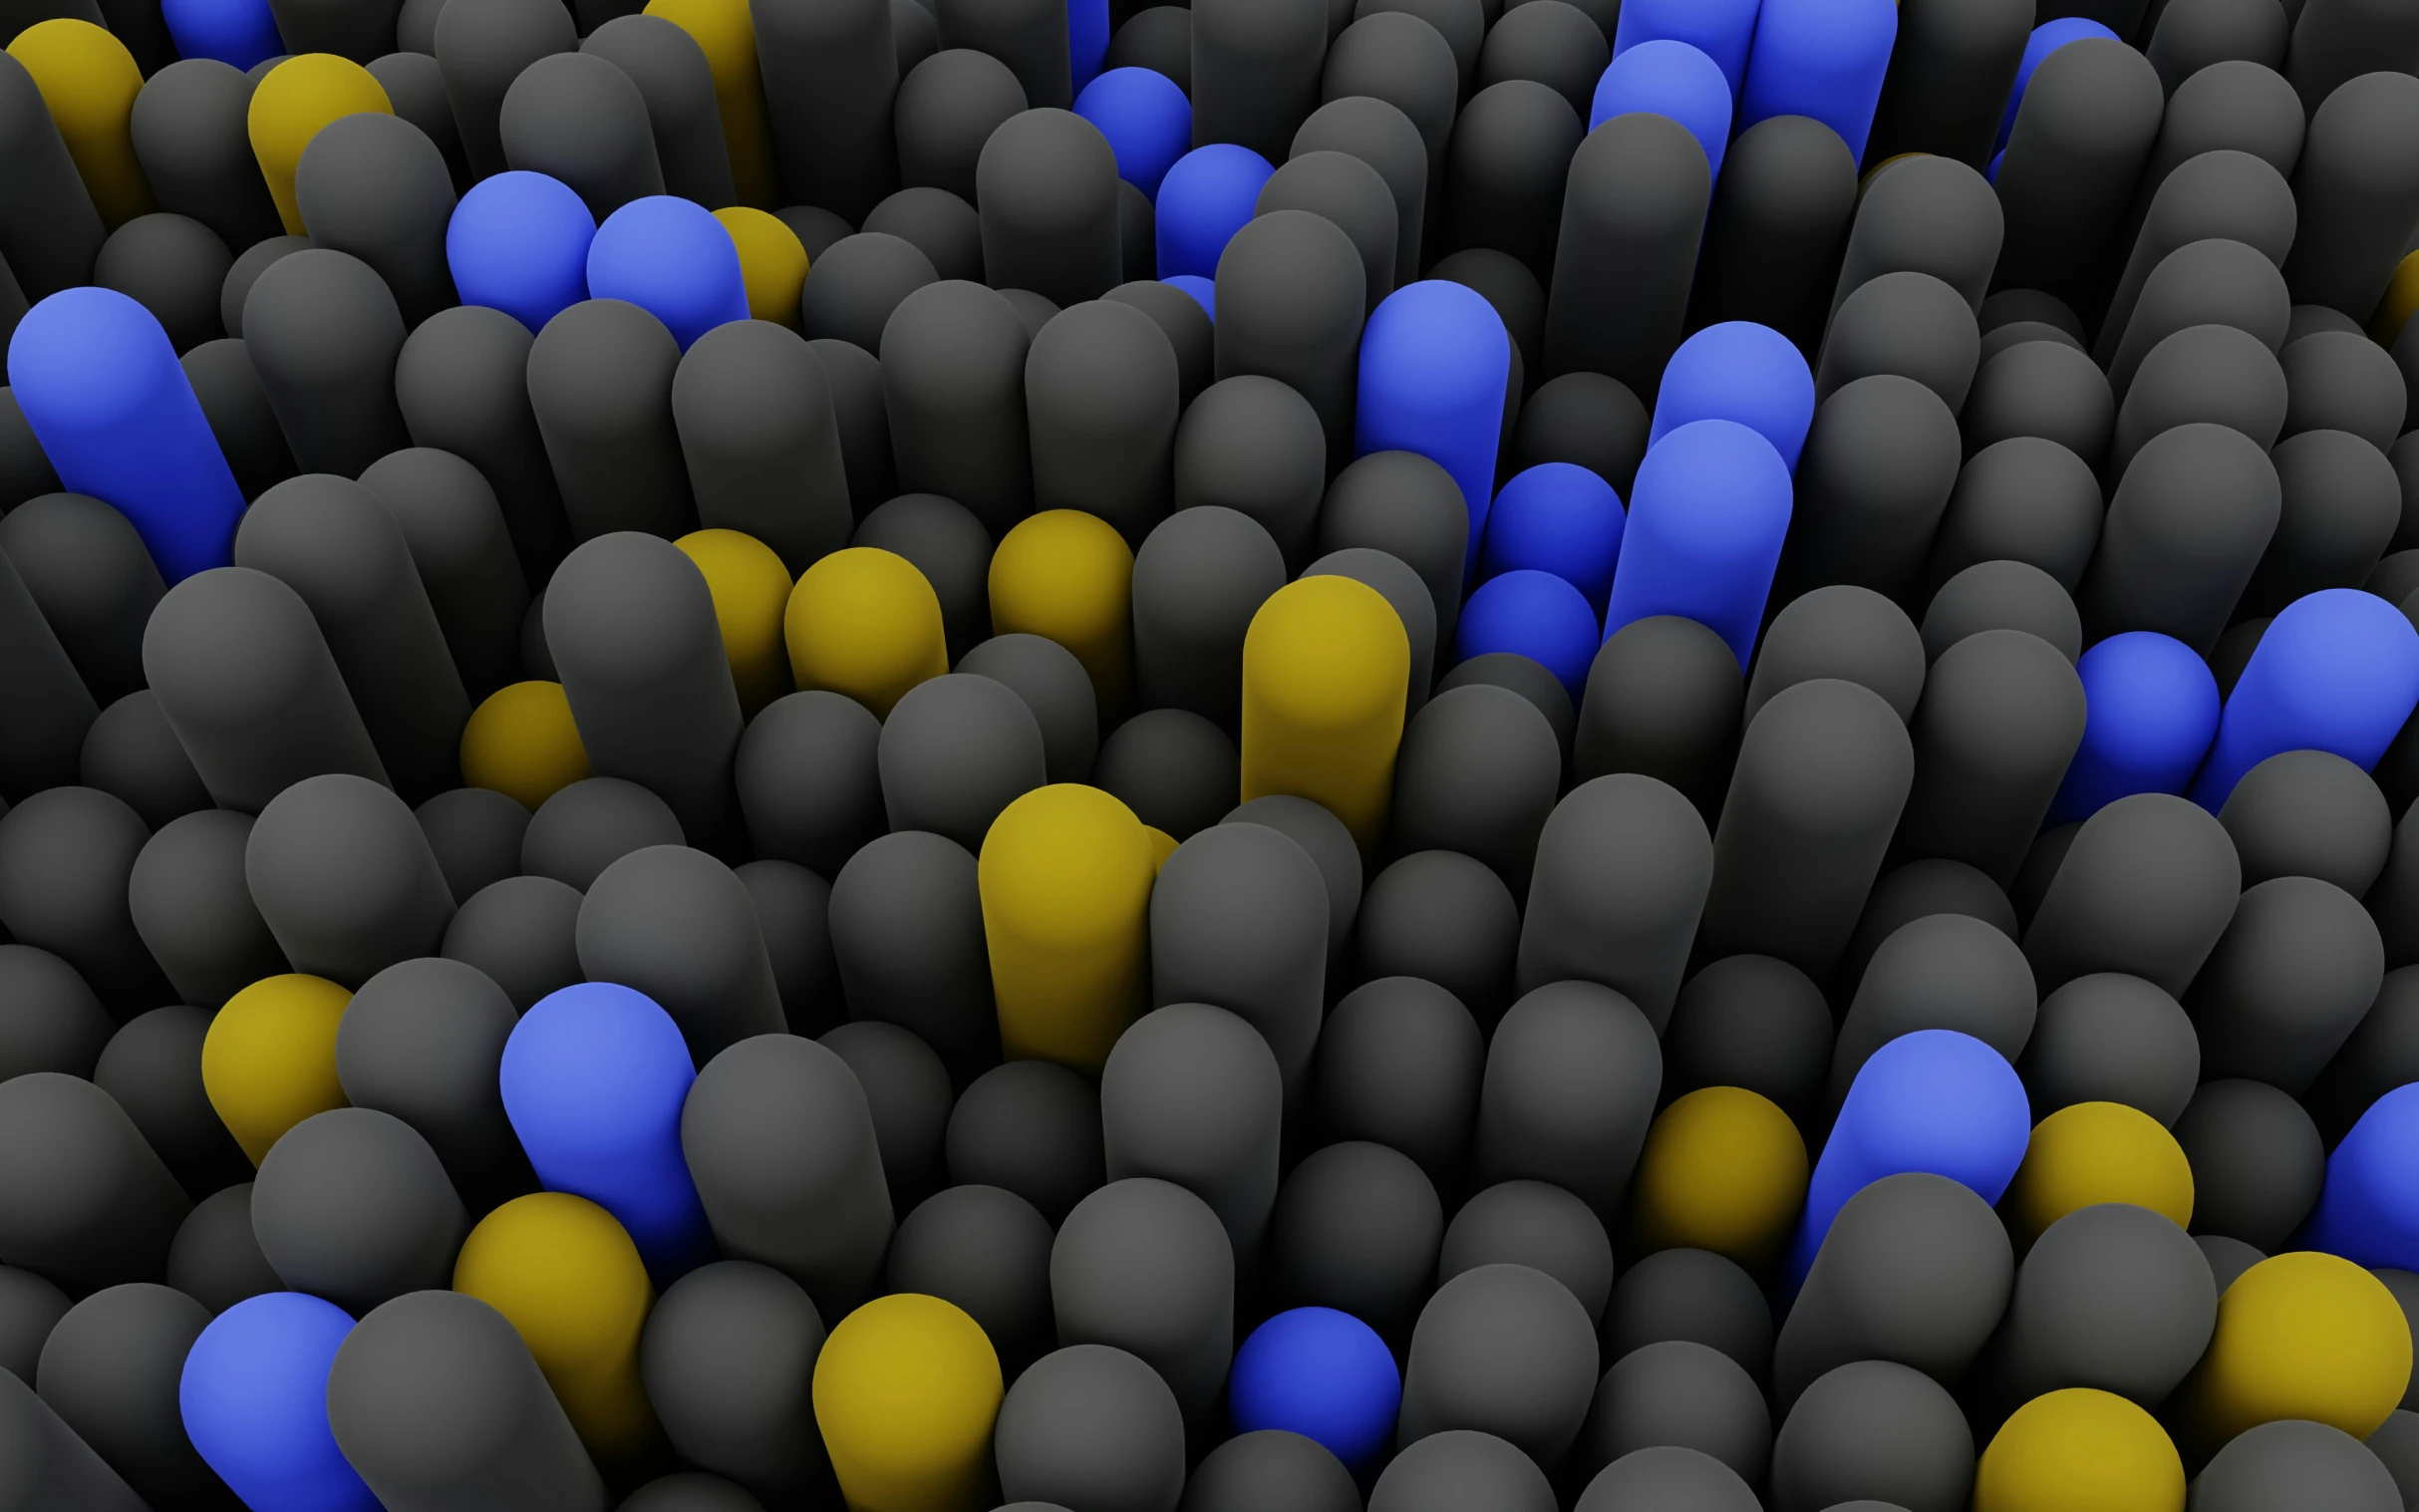 a 3d po of an image of many small black and yellow objects